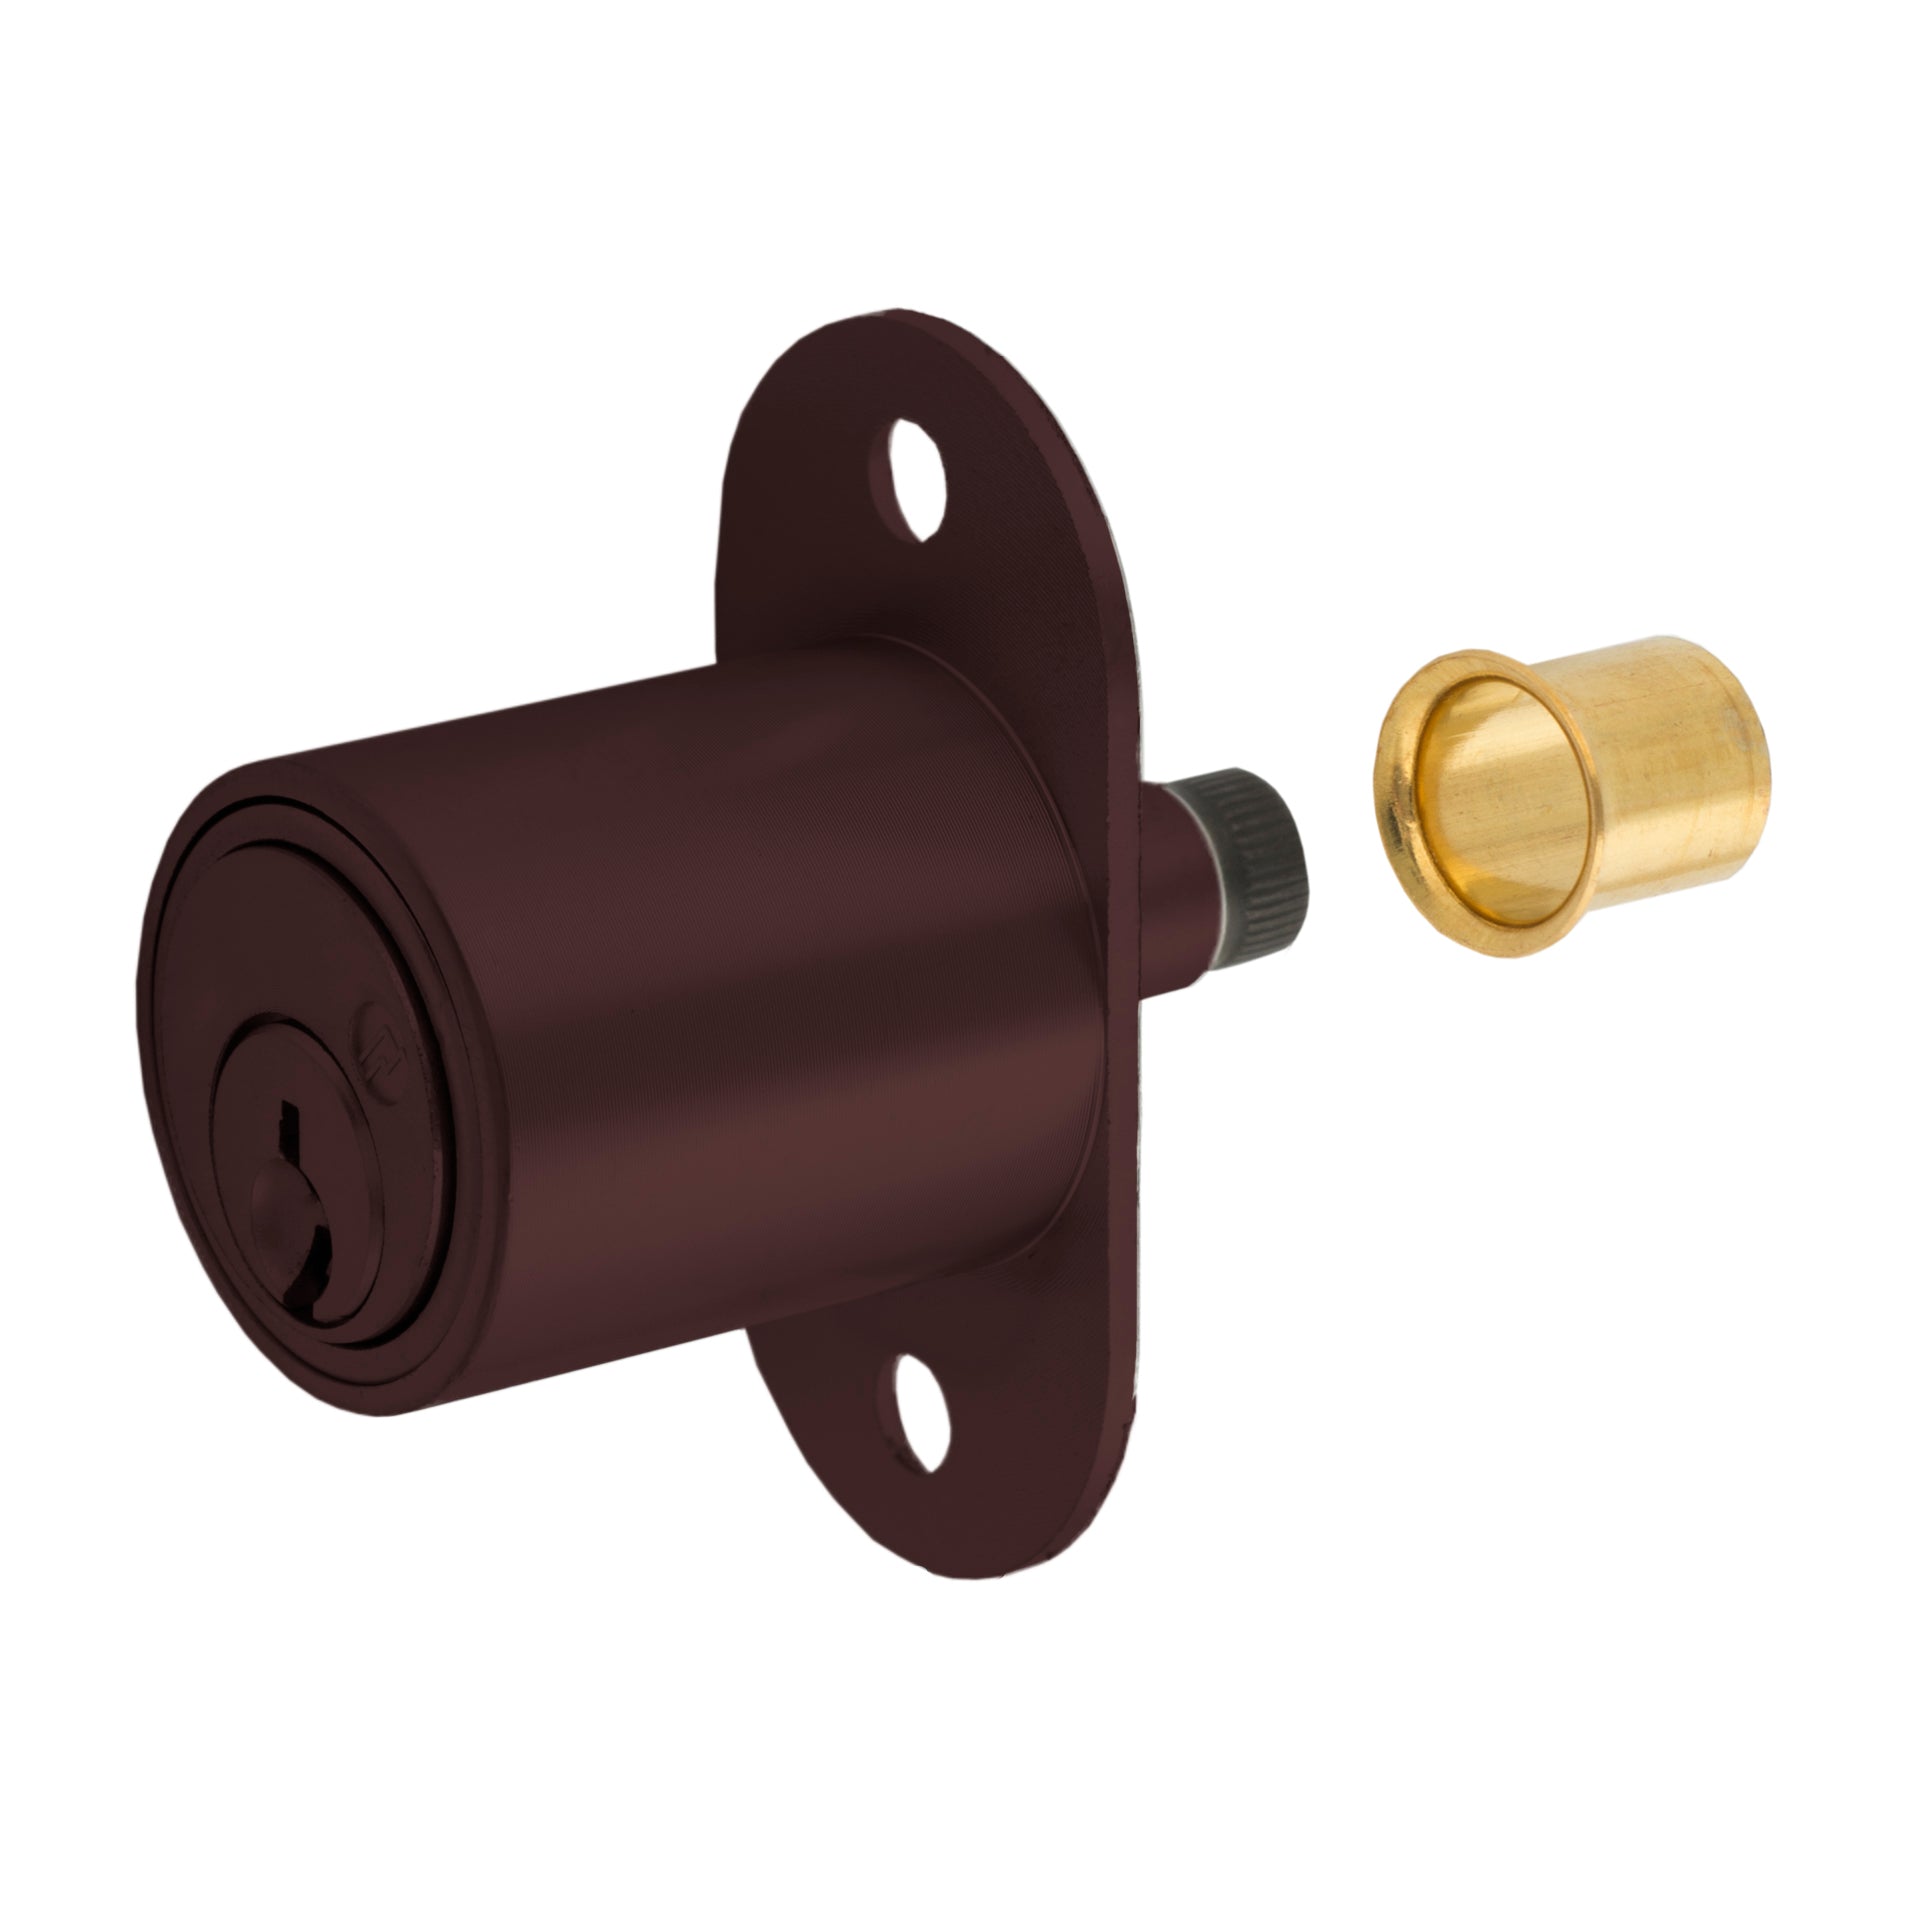 Olympus - 400SD - Sliding Door Plunger Lock - Oil Rubbed Bronze - 7/8" Material Thickness - Optional Keying - Grade 1 - UHS Hardware